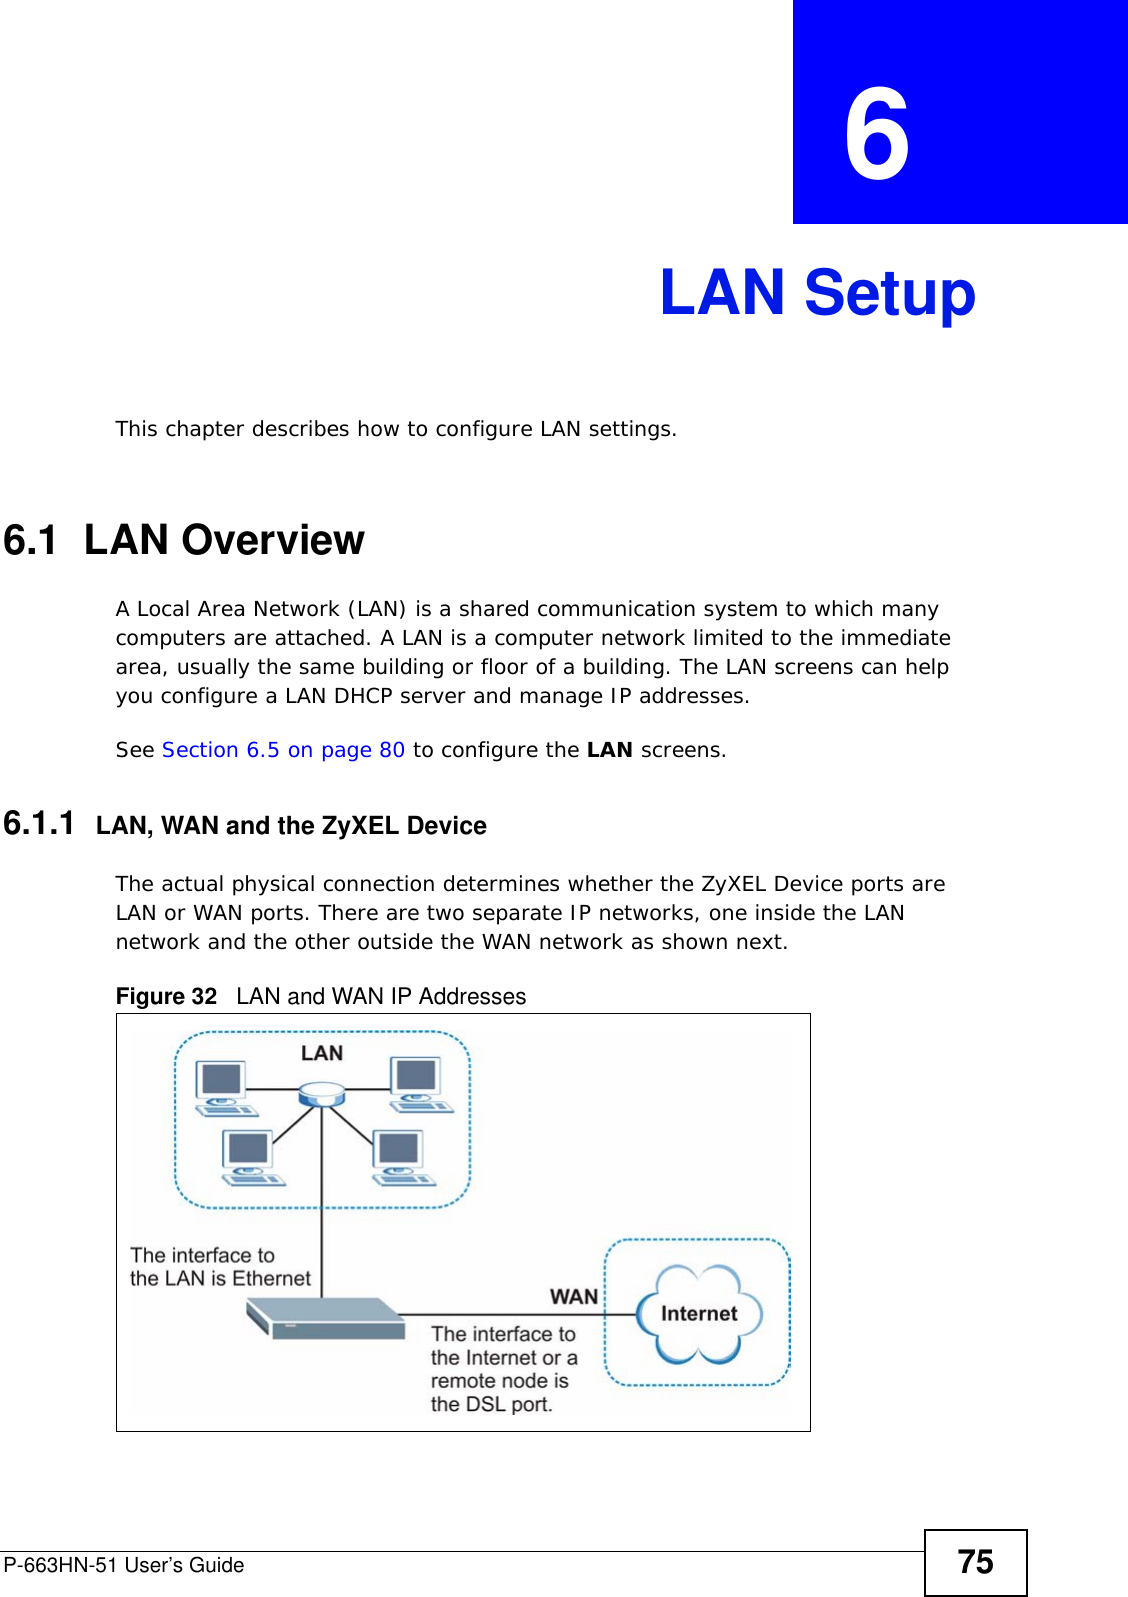 P-663HN-51 User’s Guide 75CHAPTER  6 LAN SetupThis chapter describes how to configure LAN settings.6.1  LAN Overview A Local Area Network (LAN) is a shared communication system to which many computers are attached. A LAN is a computer network limited to the immediate area, usually the same building or floor of a building. The LAN screens can help you configure a LAN DHCP server and manage IP addresses. See Section 6.5 on page 80 to configure the LAN screens. 6.1.1  LAN, WAN and the ZyXEL DeviceThe actual physical connection determines whether the ZyXEL Device ports are LAN or WAN ports. There are two separate IP networks, one inside the LAN network and the other outside the WAN network as shown next.Figure 32   LAN and WAN IP Addresses